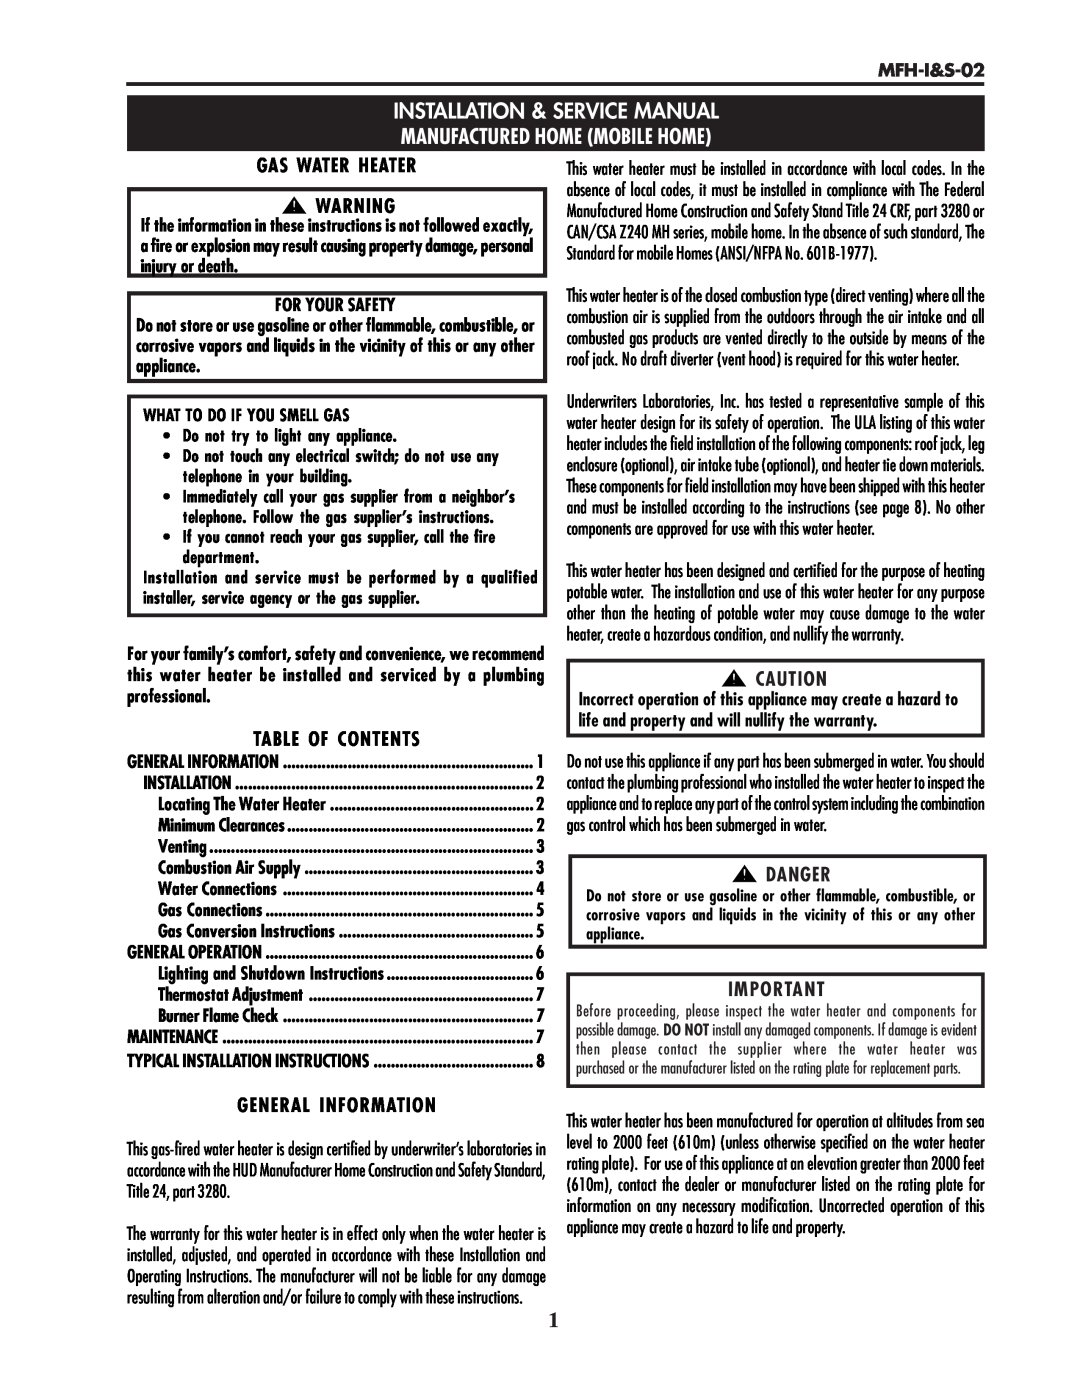 Lochinvar MFH-I&S-02 service manual Gas Water Heater, Table Of Contents, Danger, General Information 